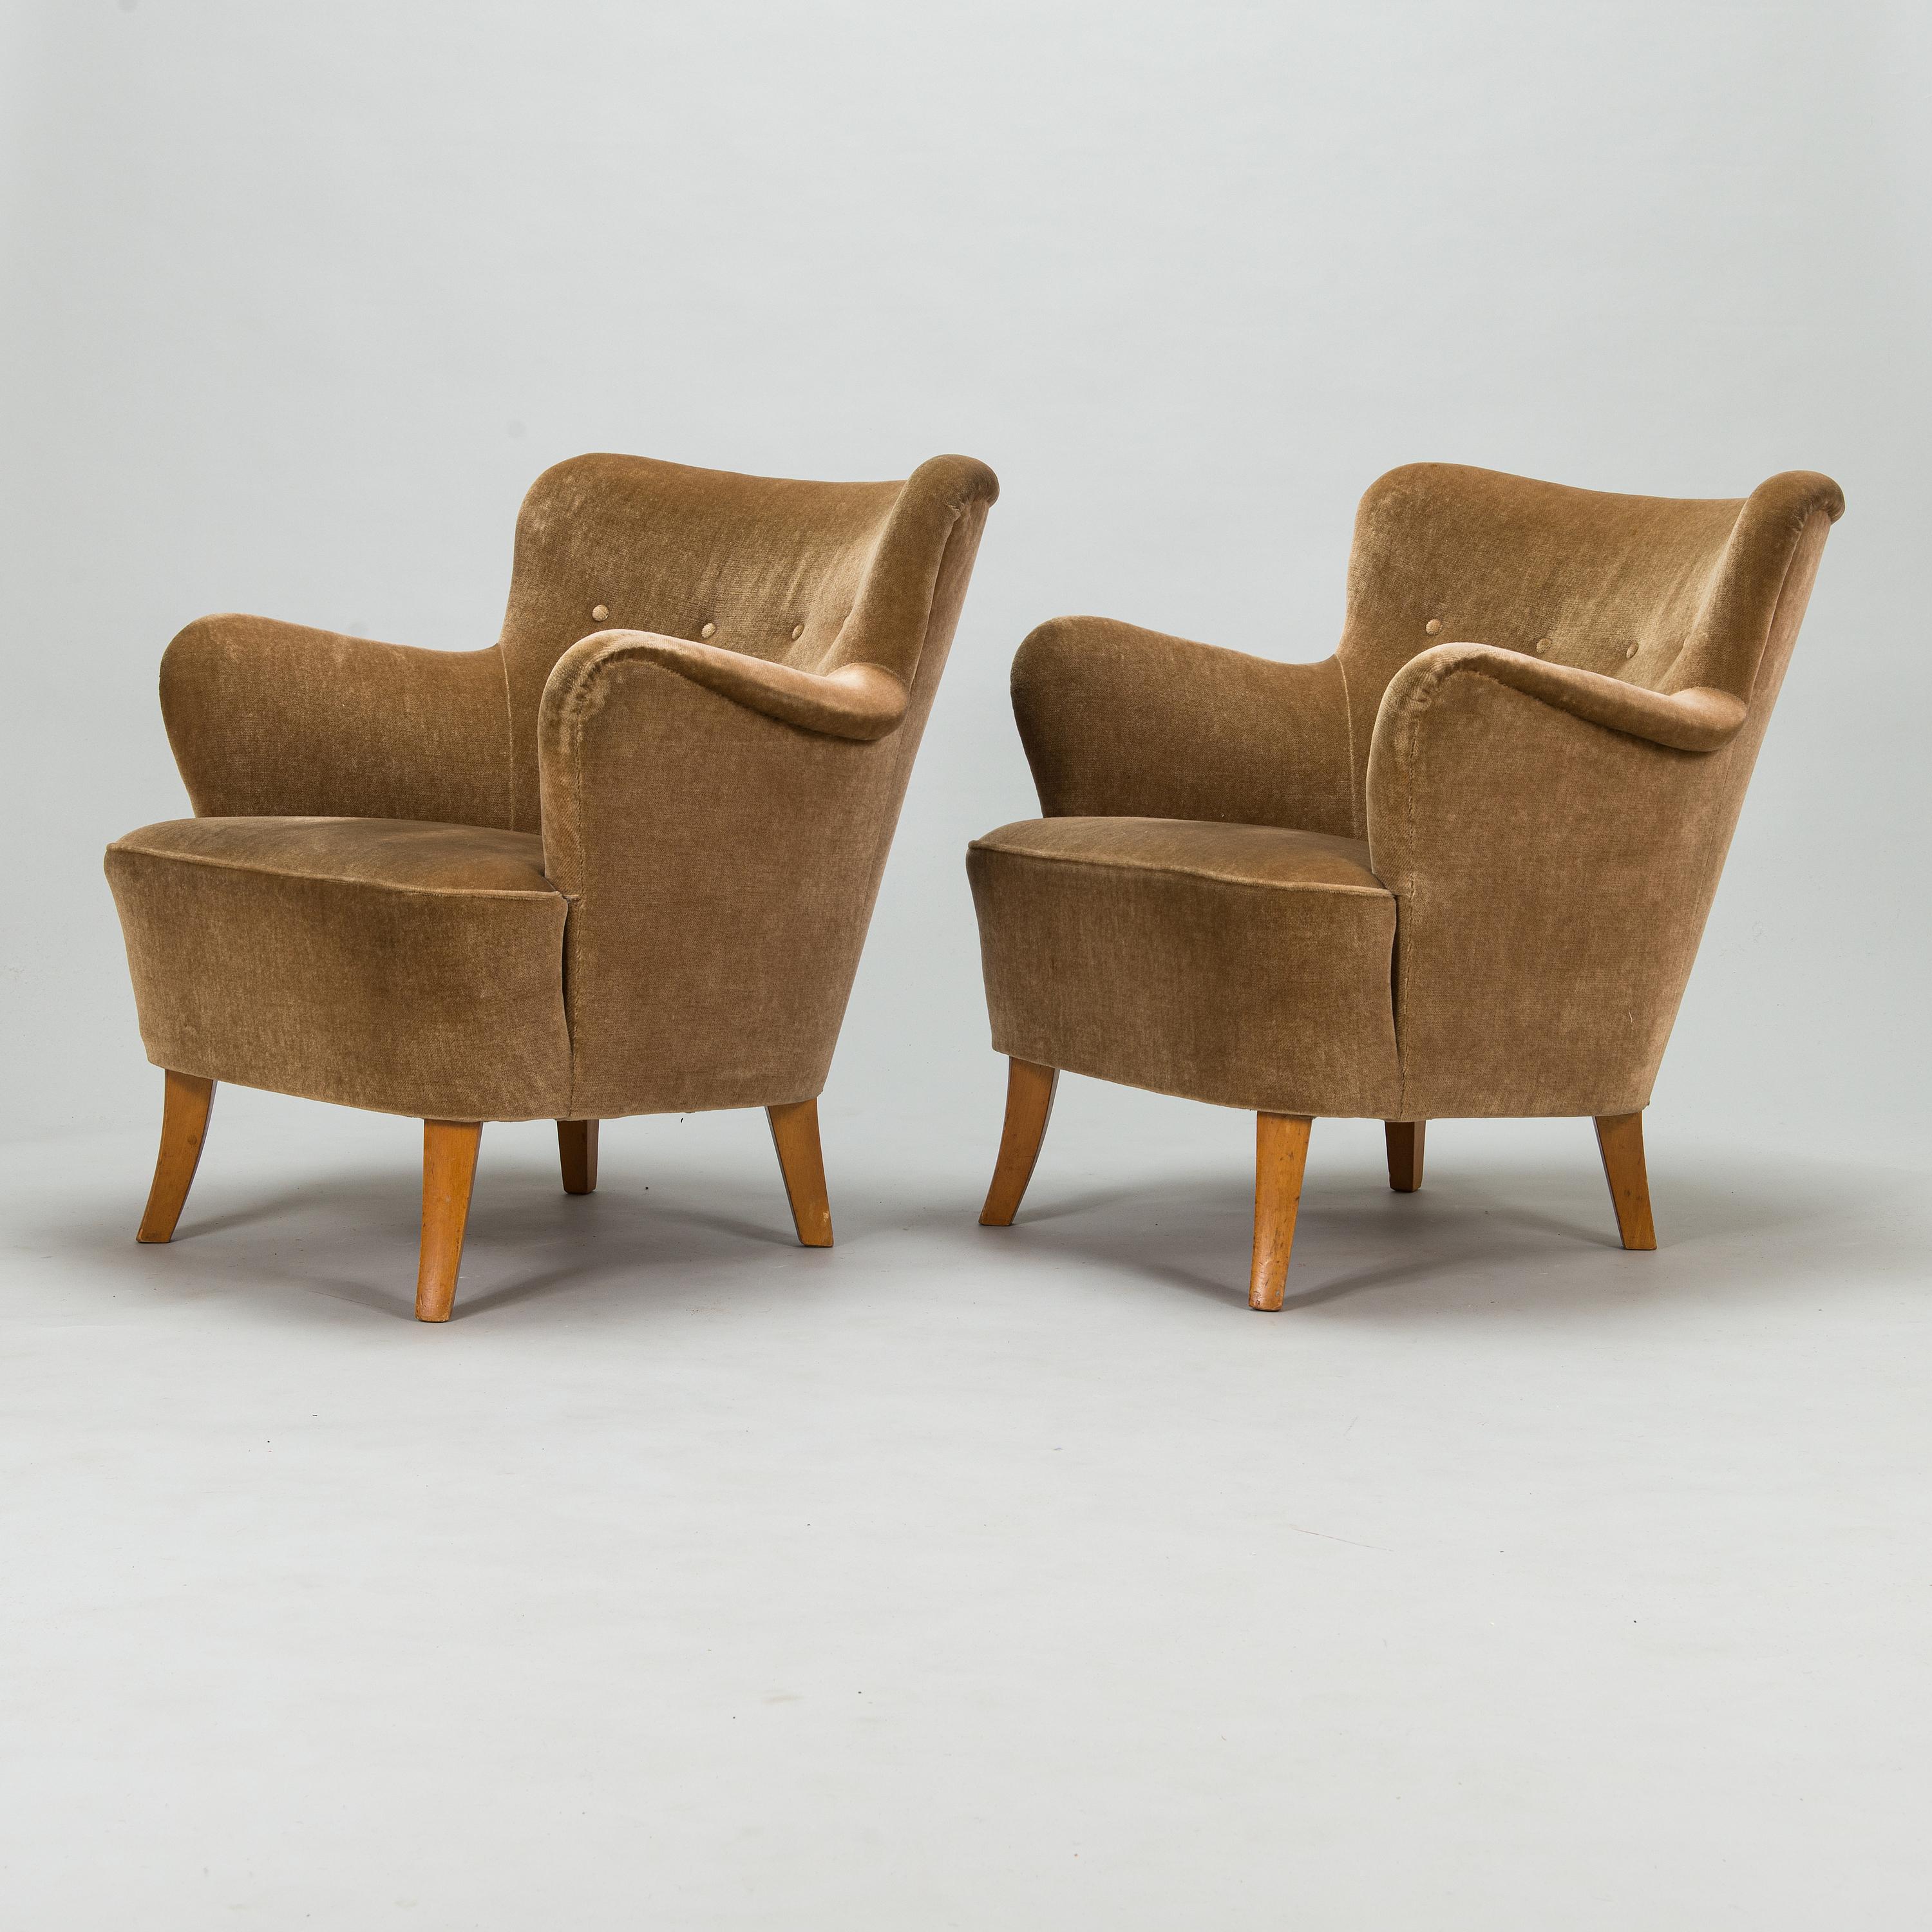 Mid Century Finnish armchairs upholstered in a soft moss green color. This timeless shape is both elegant and classic. Chairs are from the 1940's and the upholstery was done later. 

(If final destination is in California or the West Coast, the